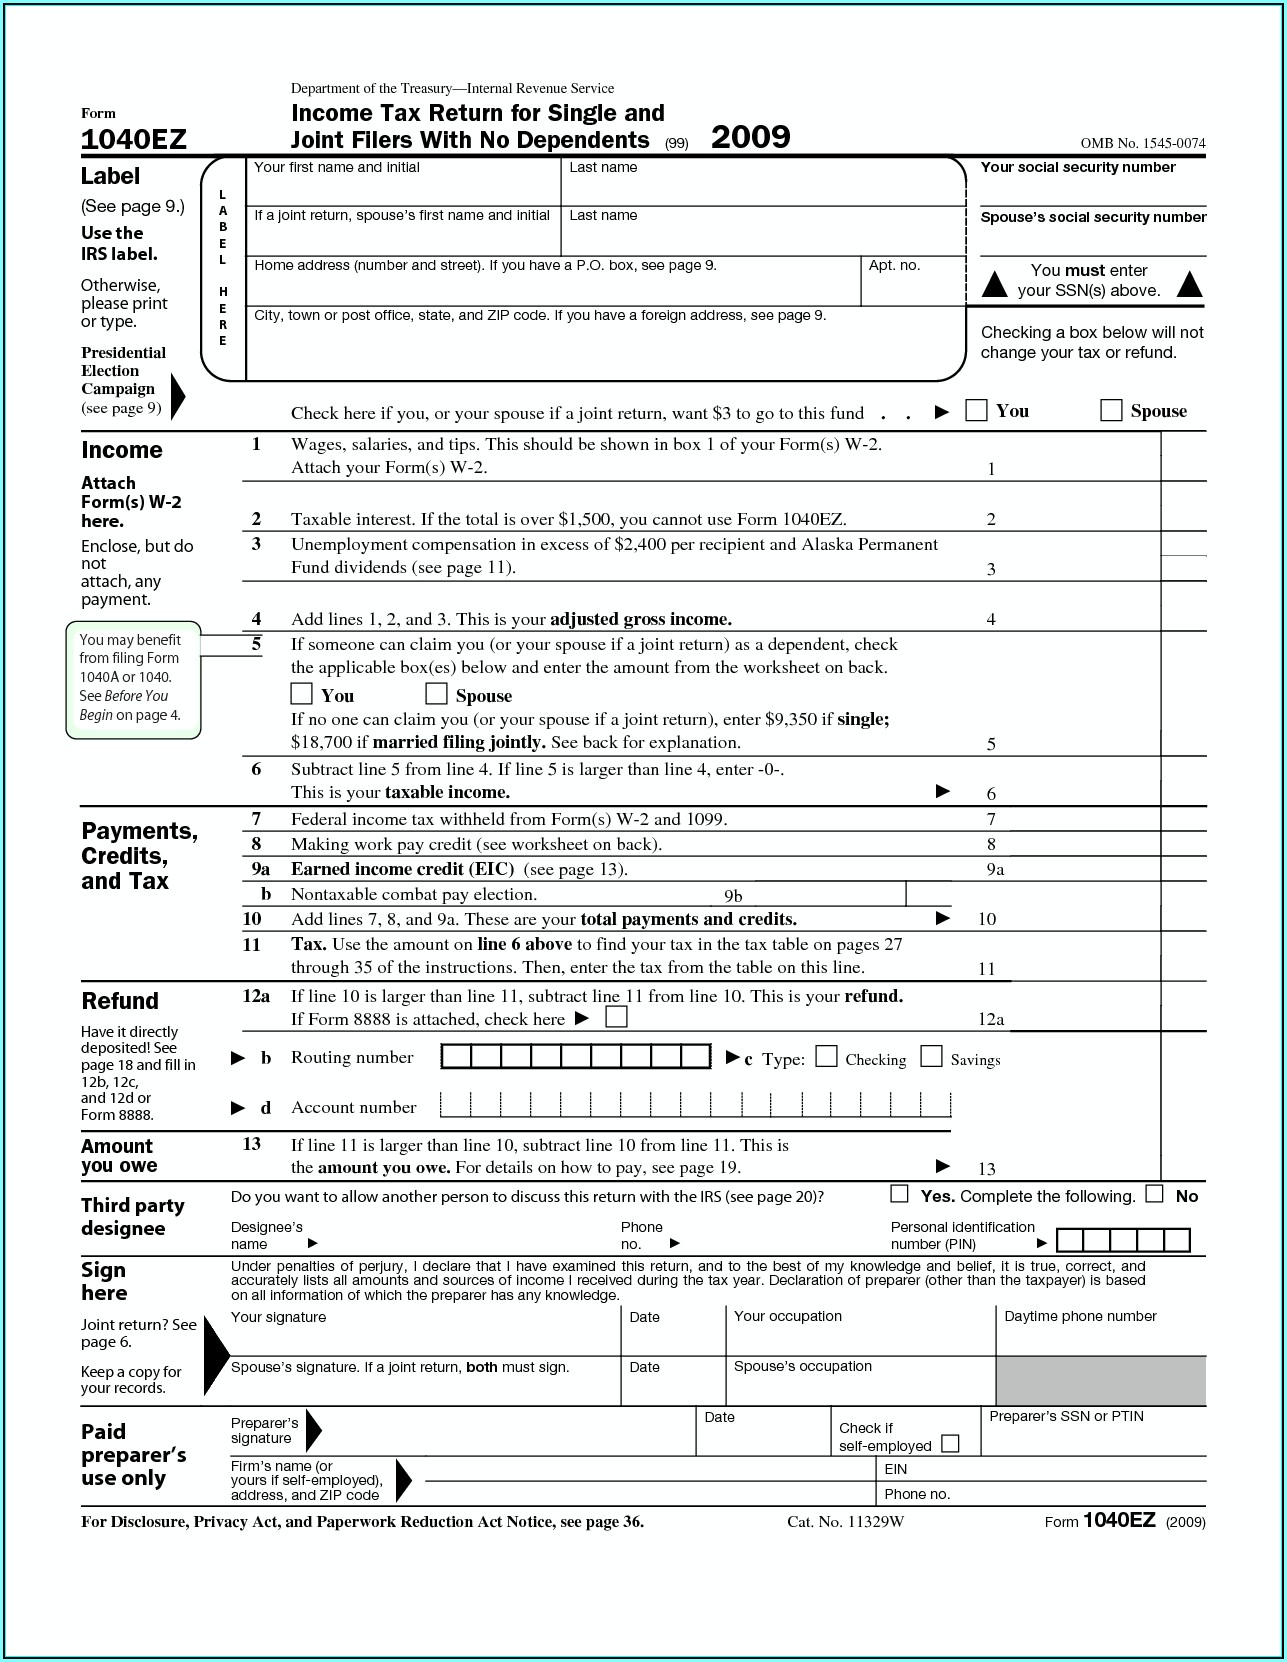 2014 Federal Income Tax Form 1040ez Instructions